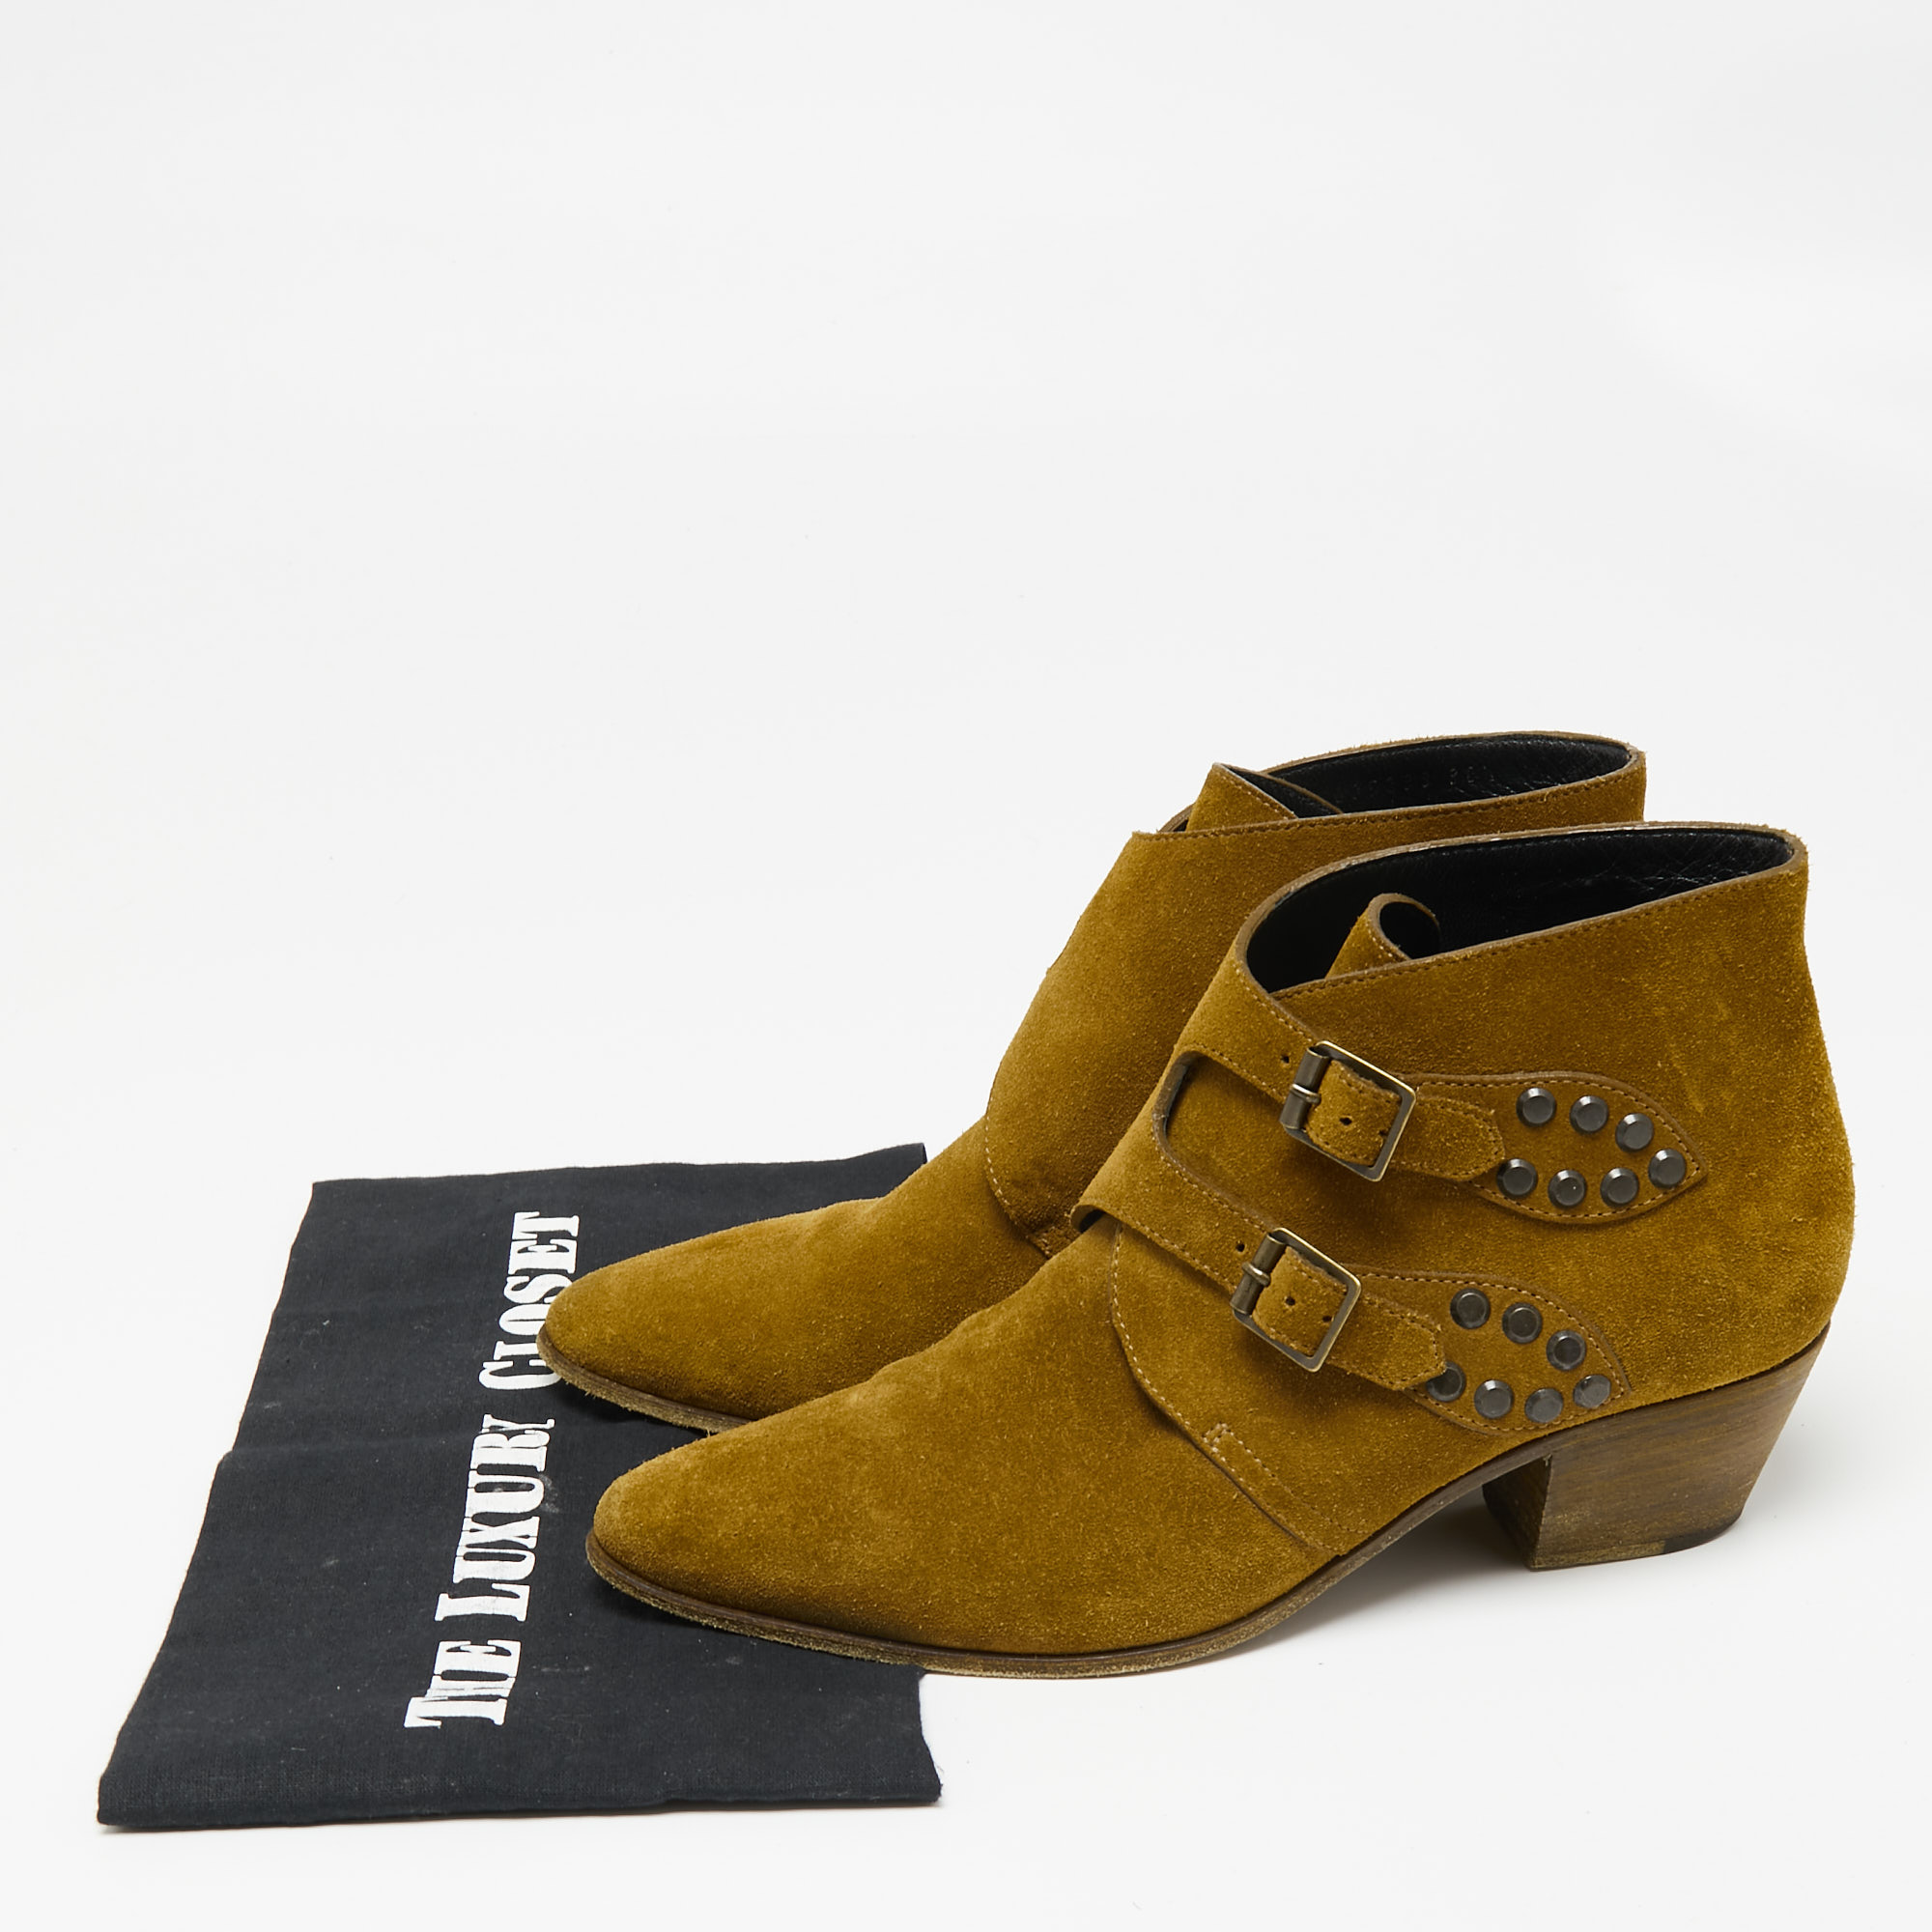 Saint Laurent Brown Suede Studded Ankle Boots Size 38.5